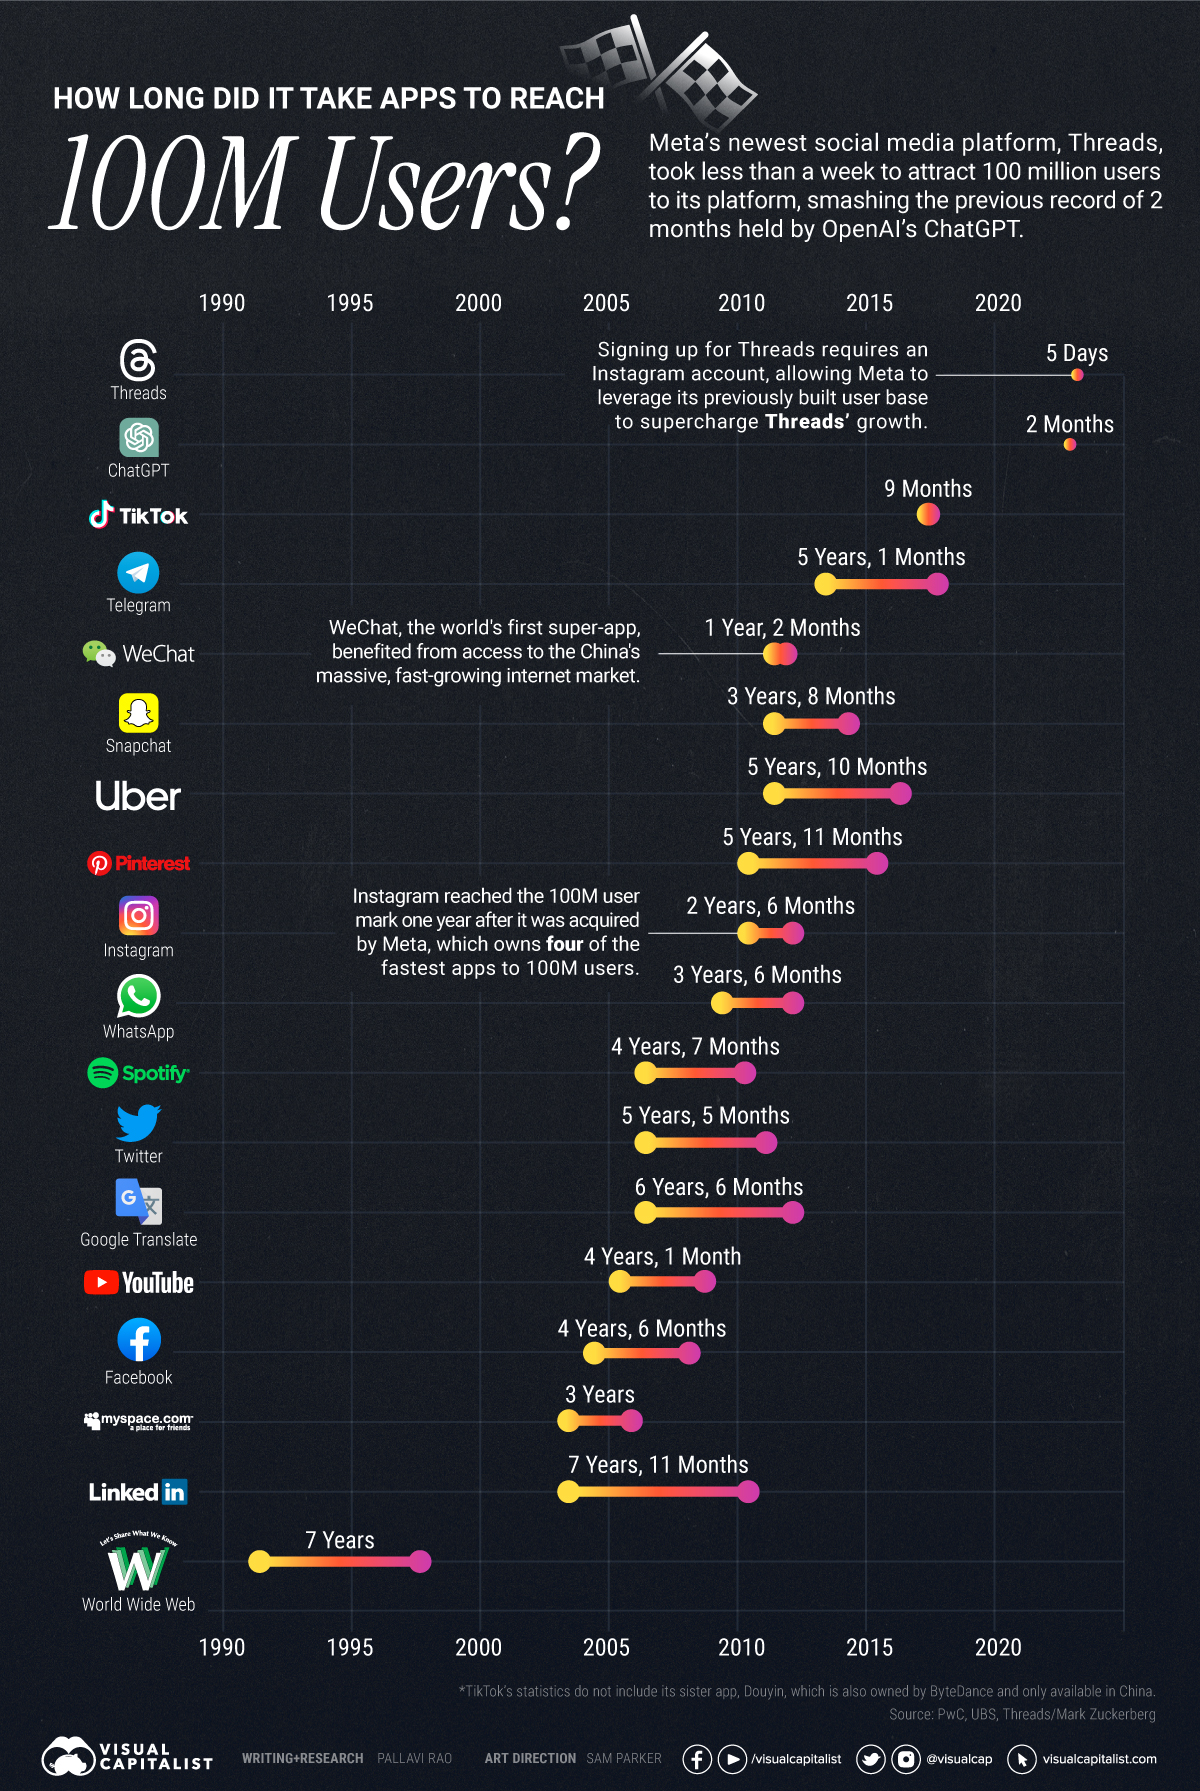 A line chart showing the time it took popular apps to register 100 million users on their platforms.